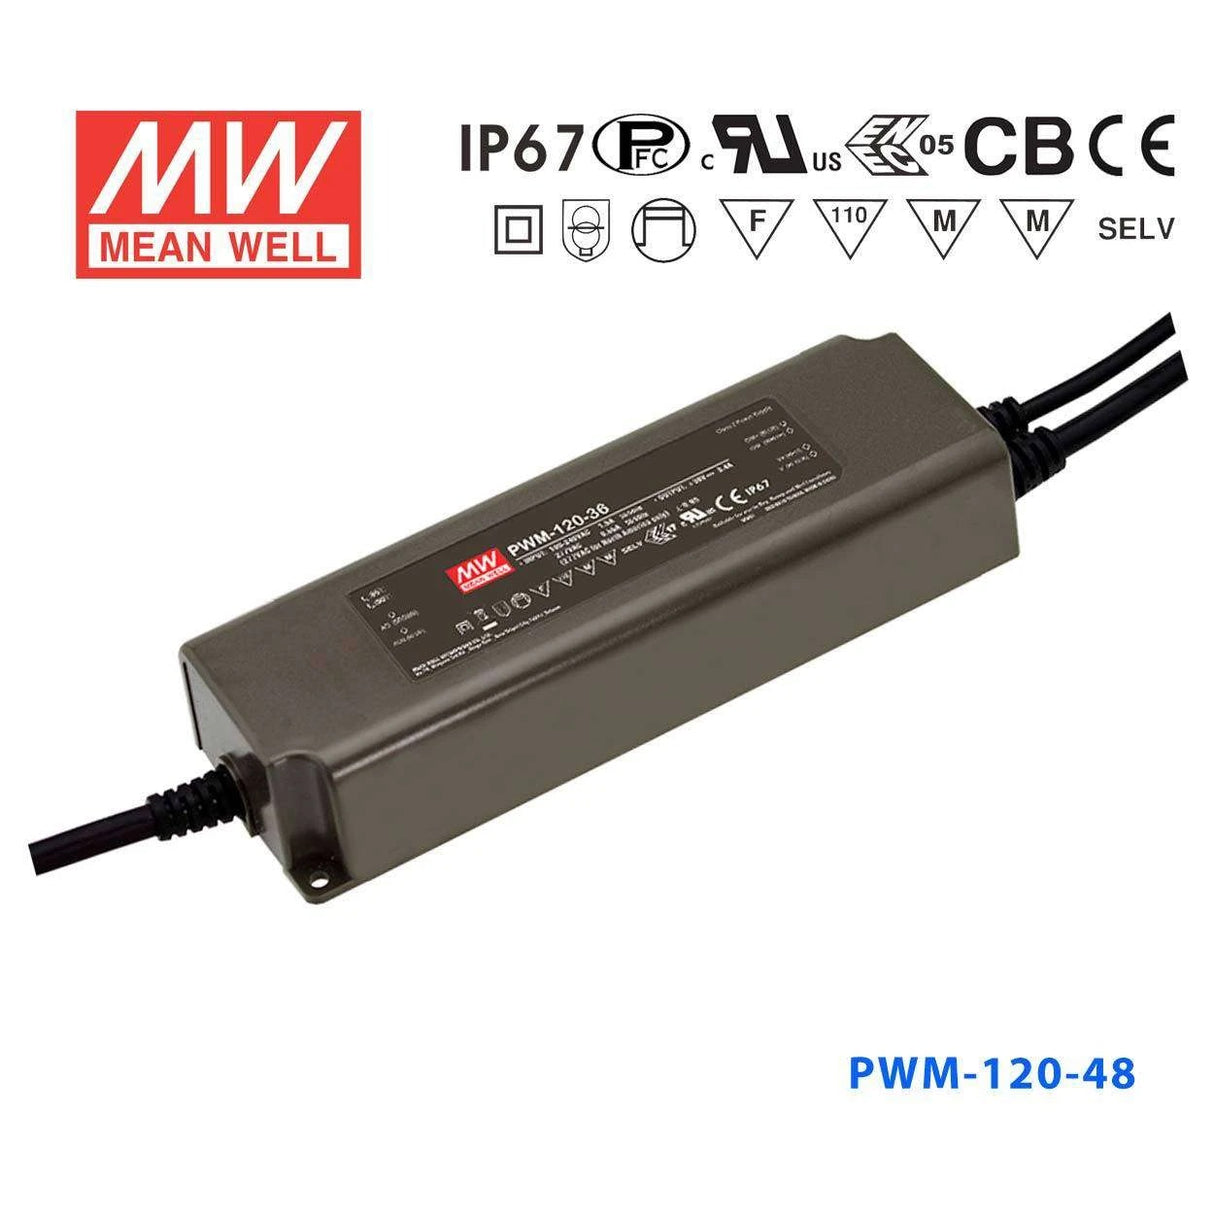 Mean Well PWM-120-48 Power Supply 120W 48V - Dimmable